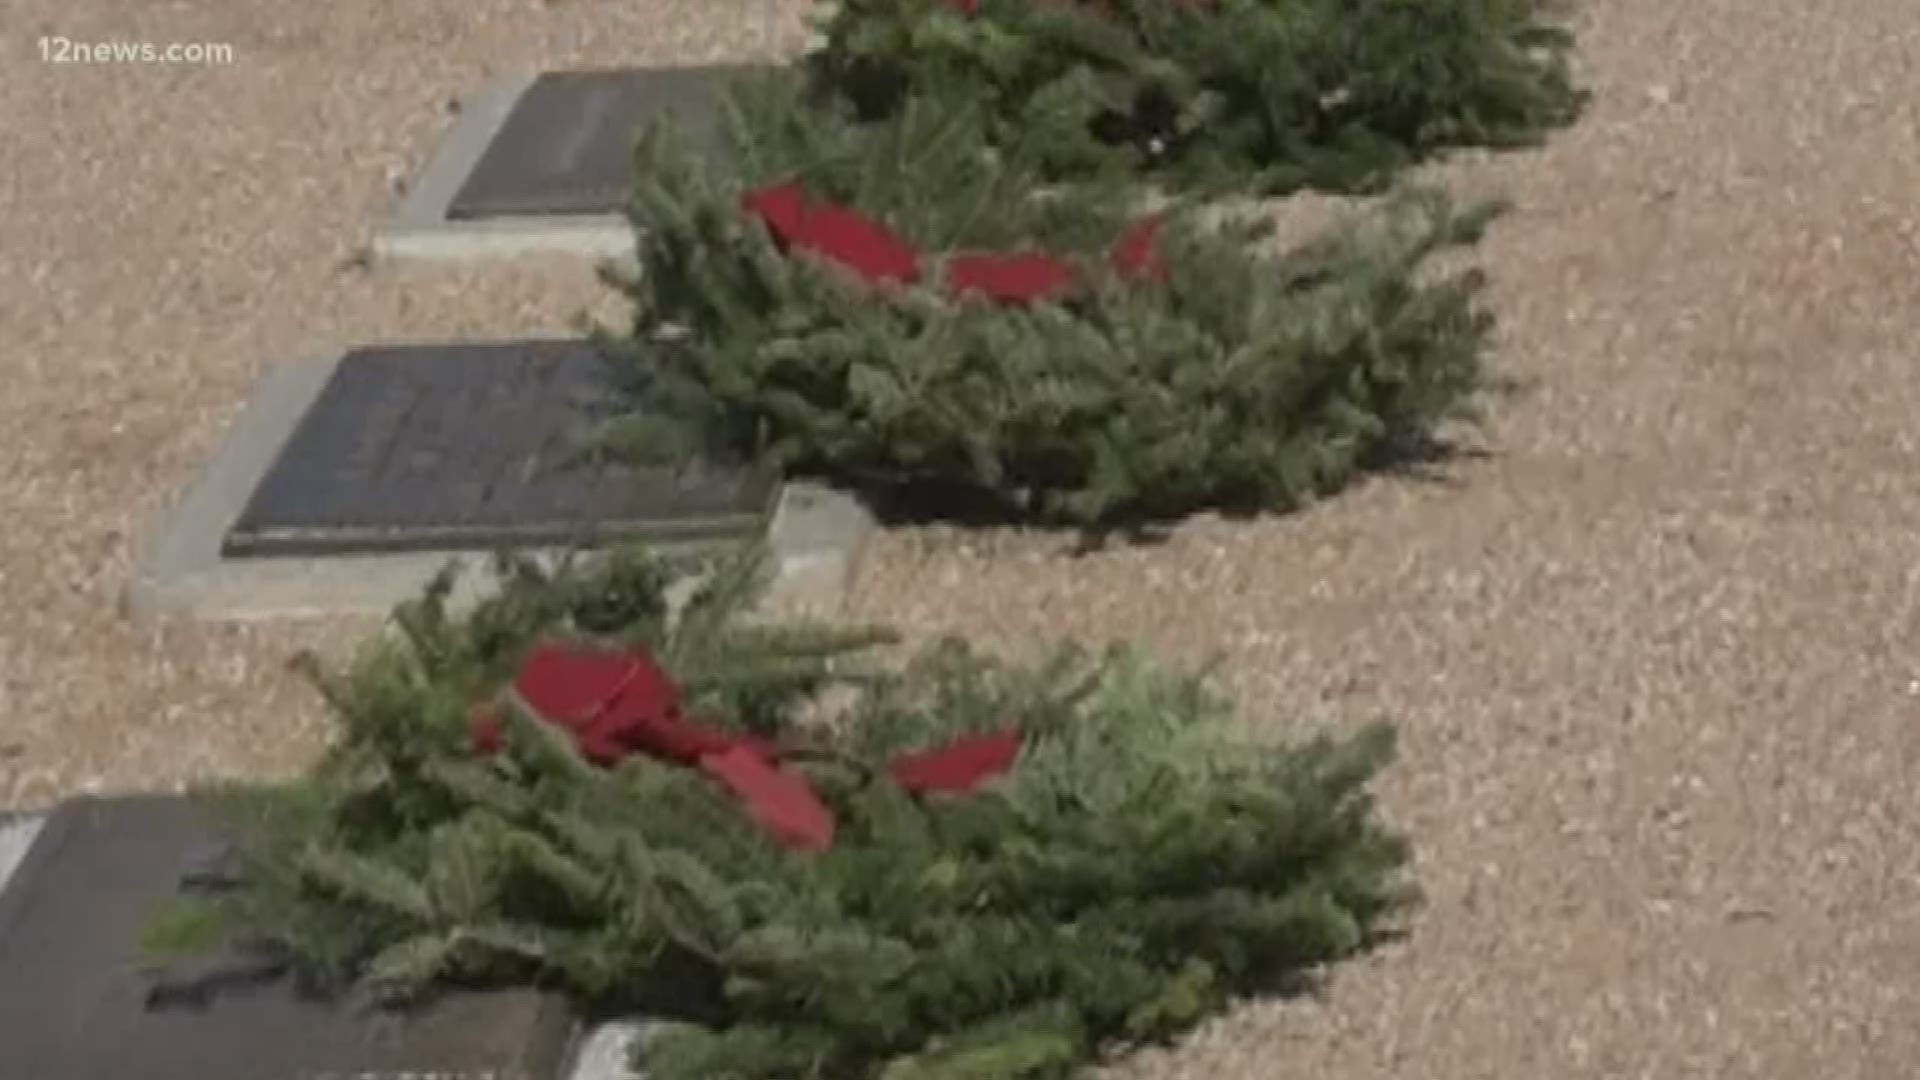 Thousands of wreaths were placed on veterans' tombstones in Phoenix.